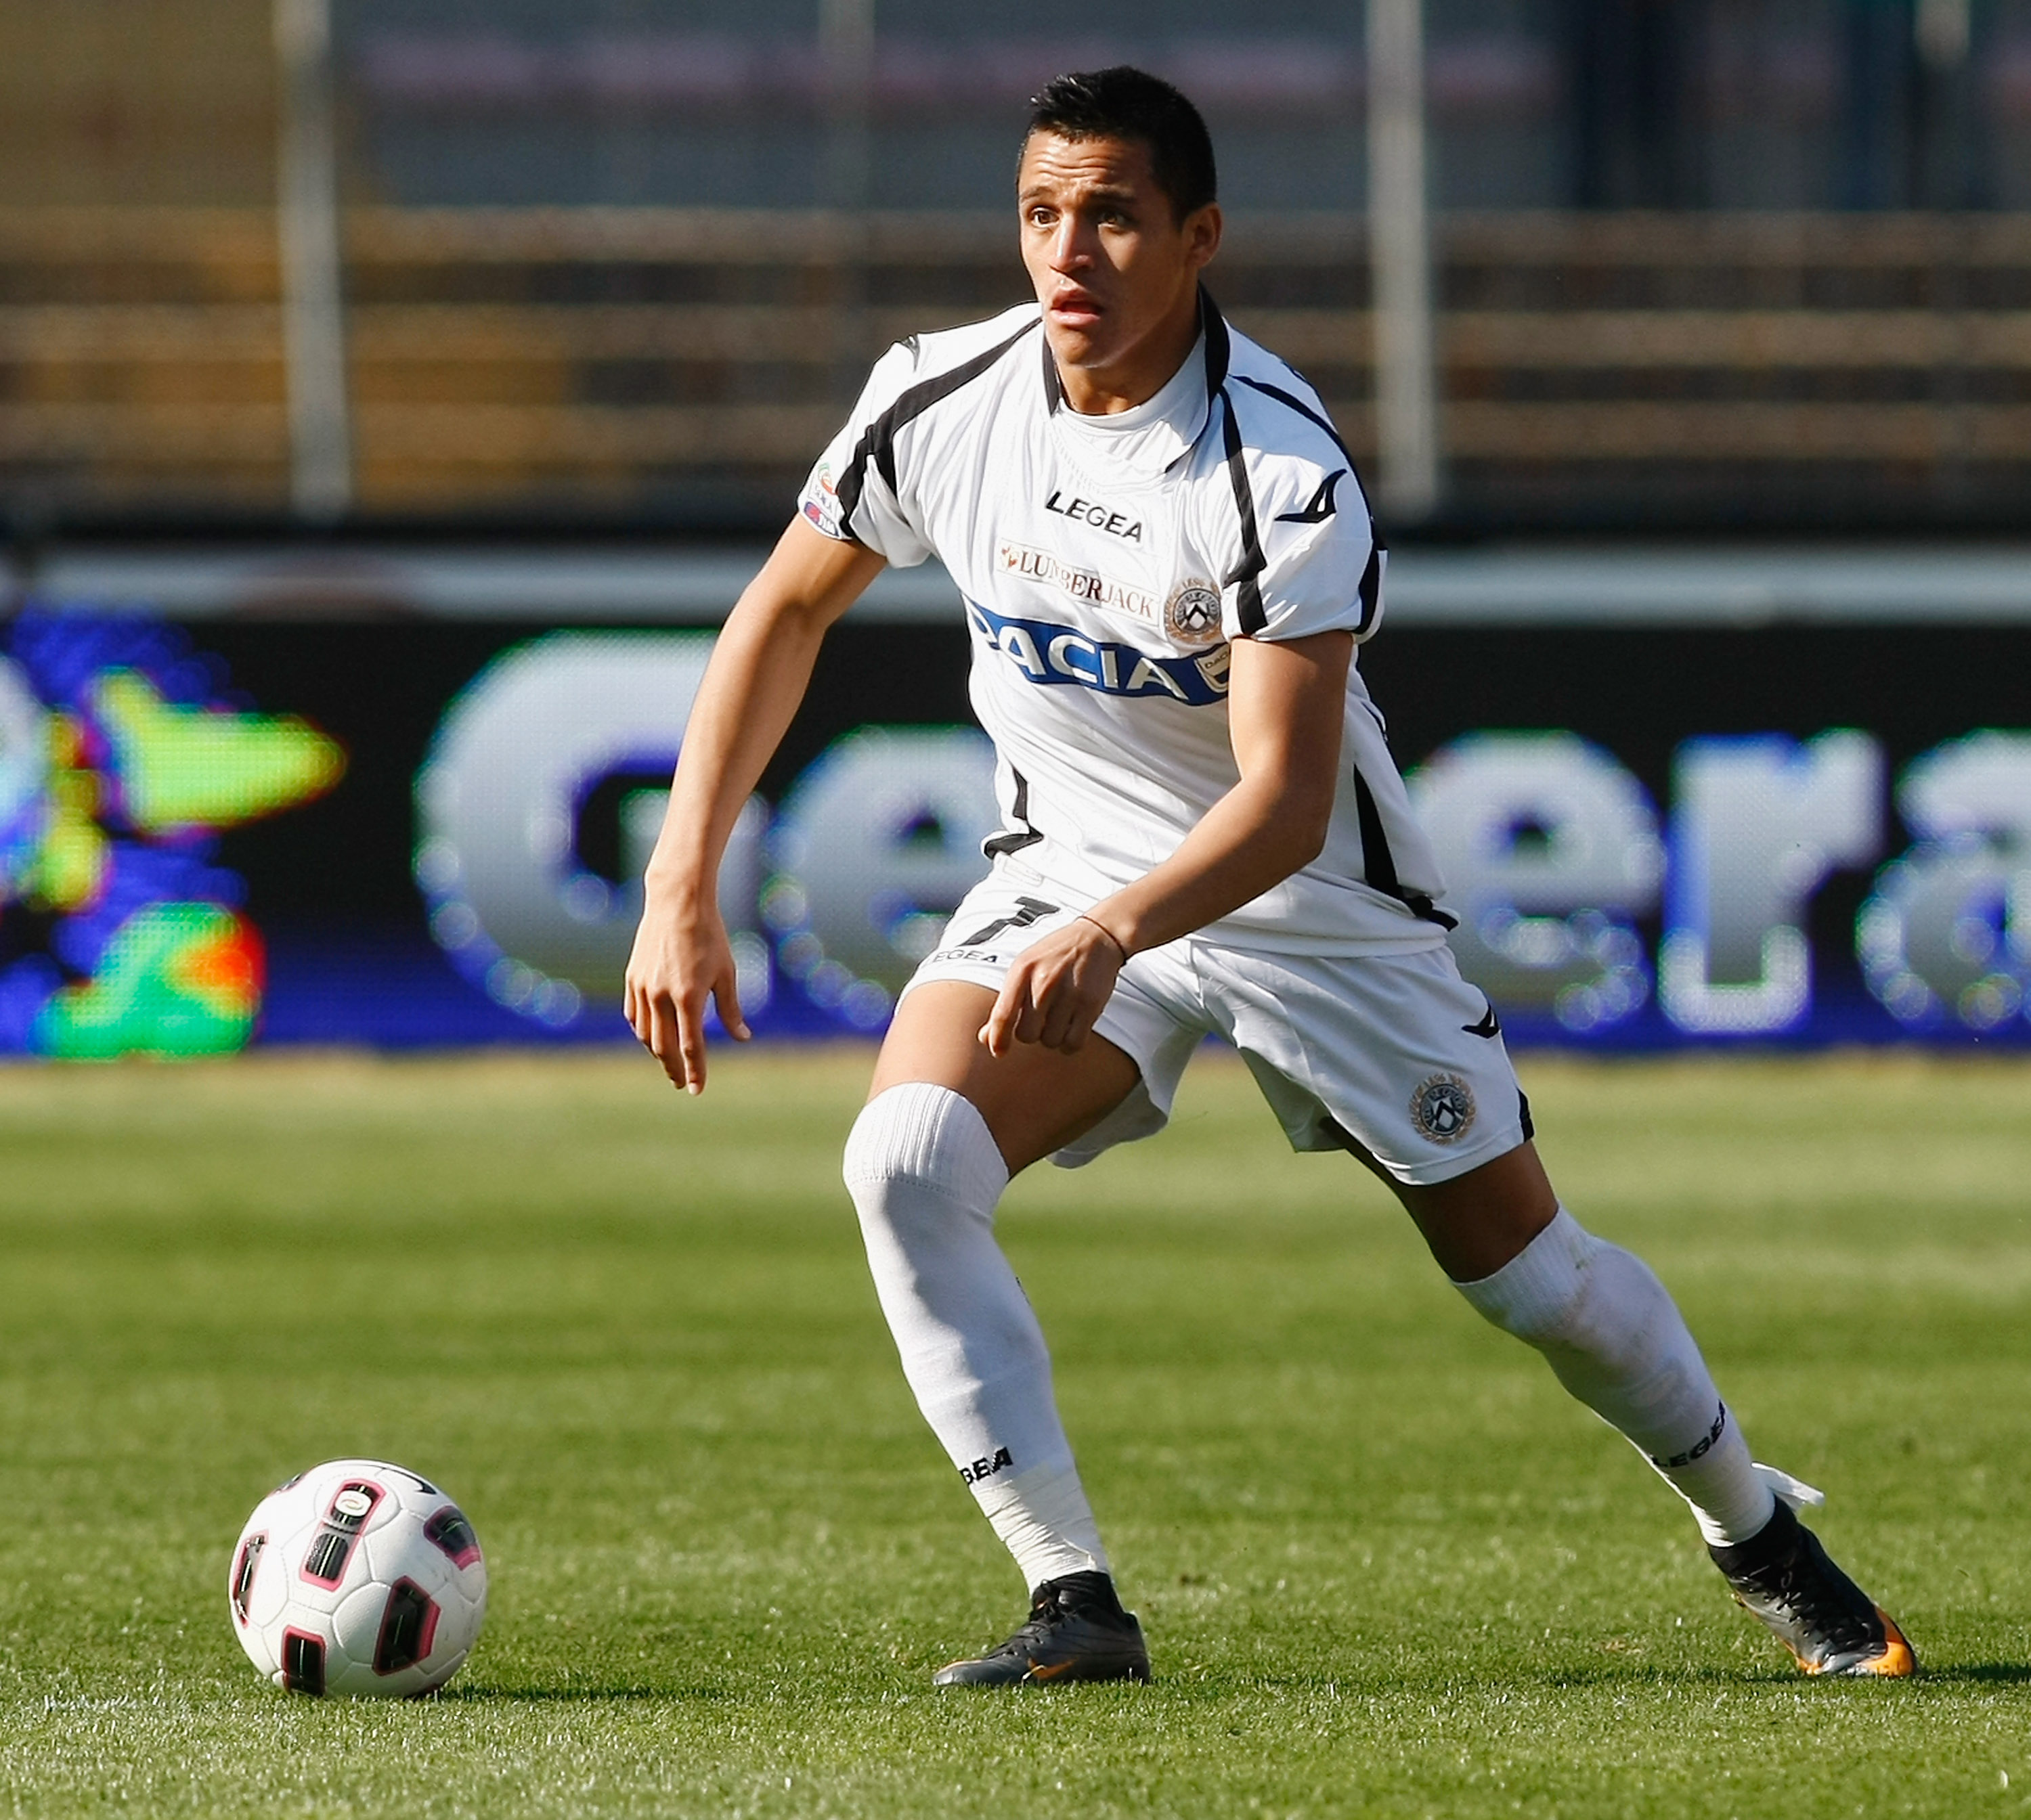 LECCE, ITALY - APRIL 03:  Alexis Sanchez of Udinese during the Serie A match between US Lecce and Udinese Calcio at Stadio Via del Mare on April 3, 2011 in Lecce, Italy.  (Photo by Maurizio Lagana/Getty Images)